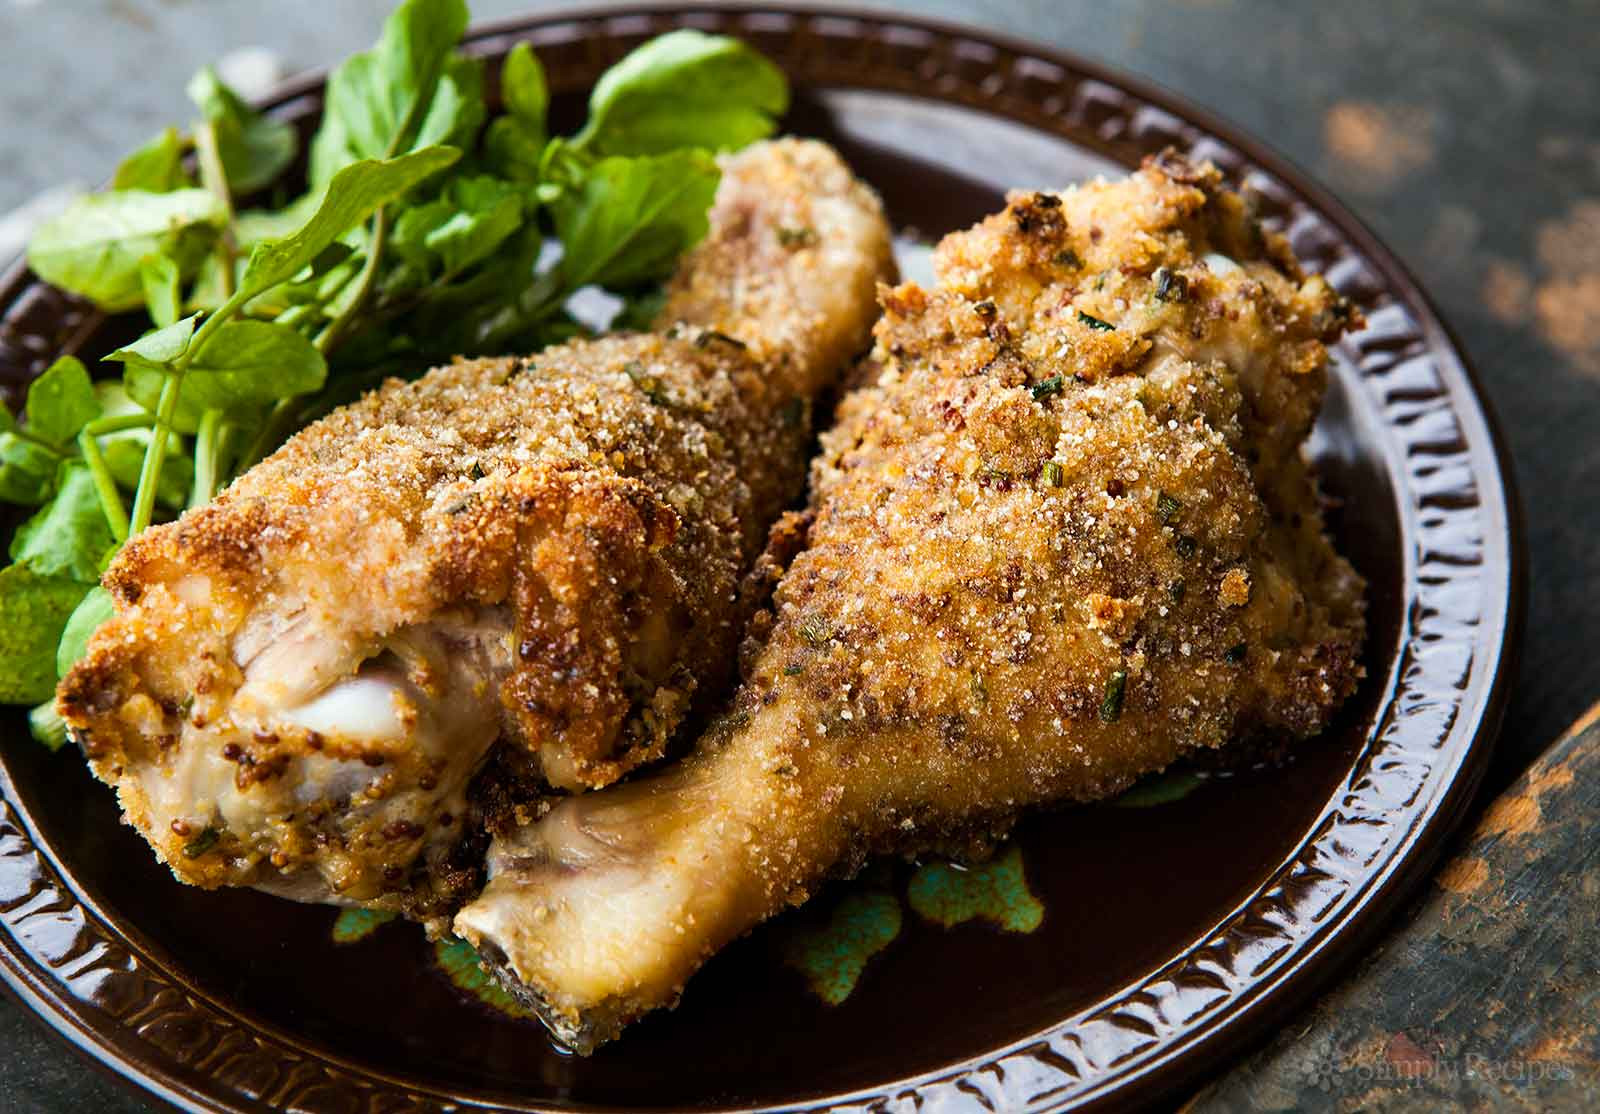 Baked Chicken Drumstick Recipes
 Breaded and Baked Chicken Drumsticks Recipe